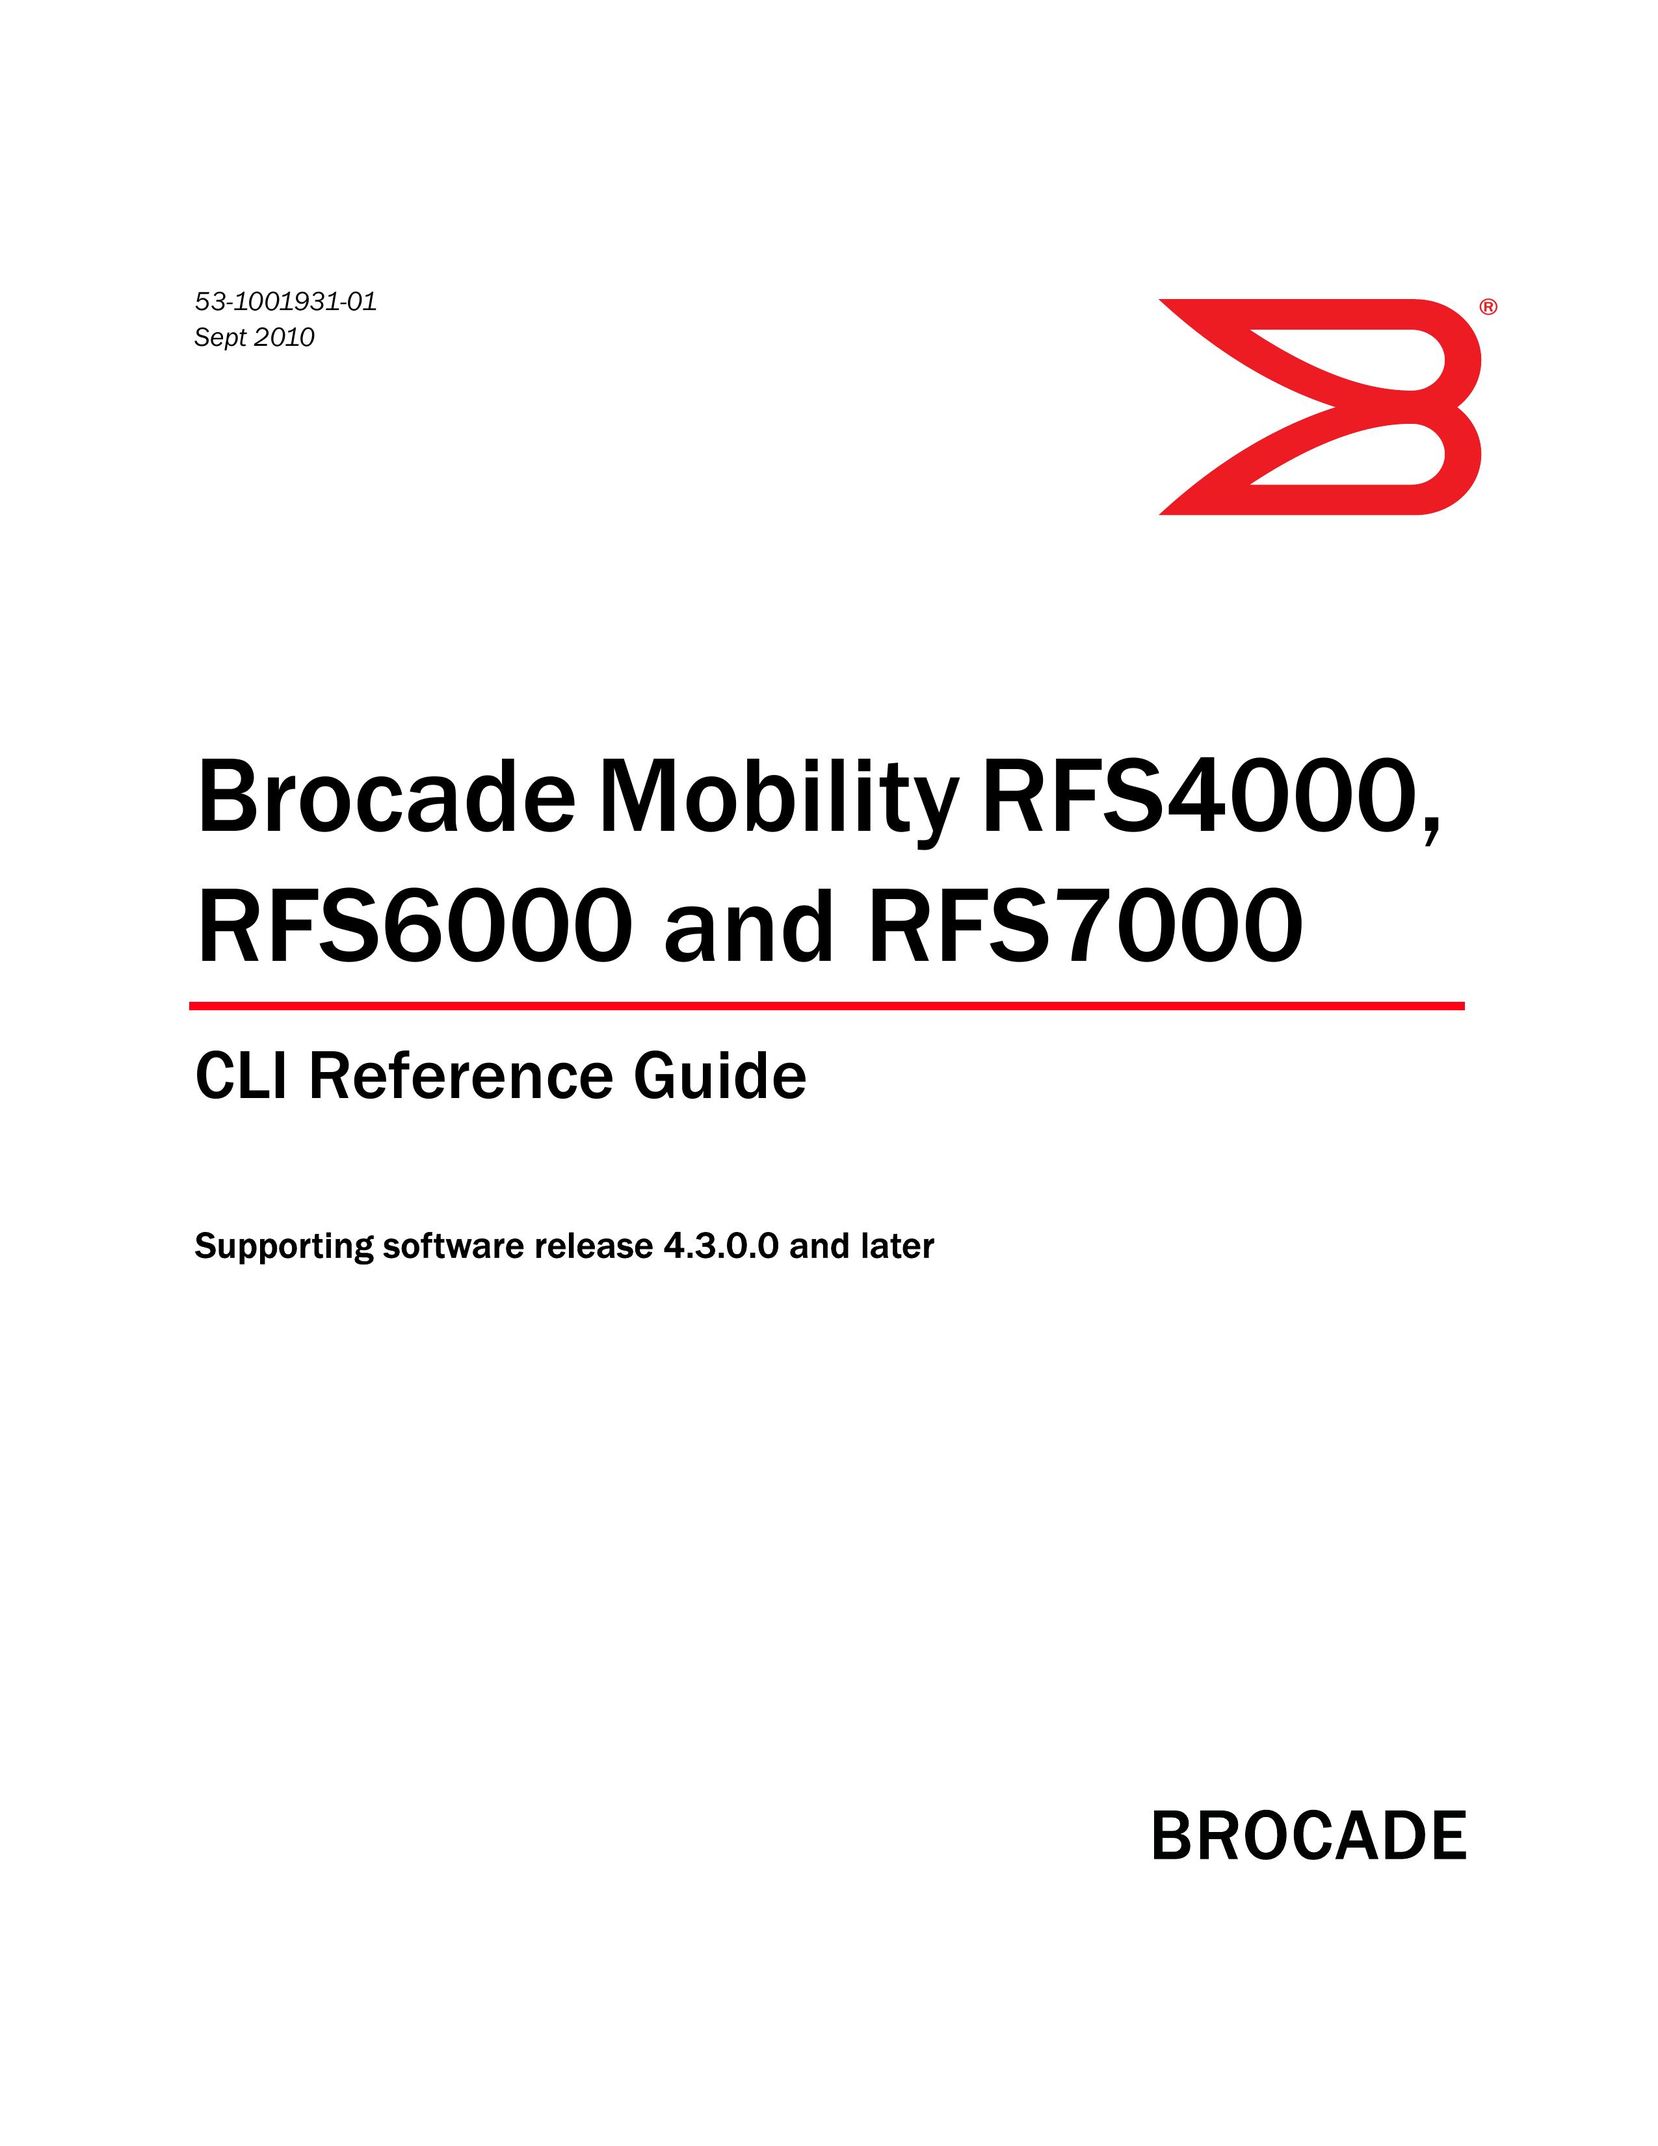 Brocade Communications Systems RFS4000 Network Router User Manual